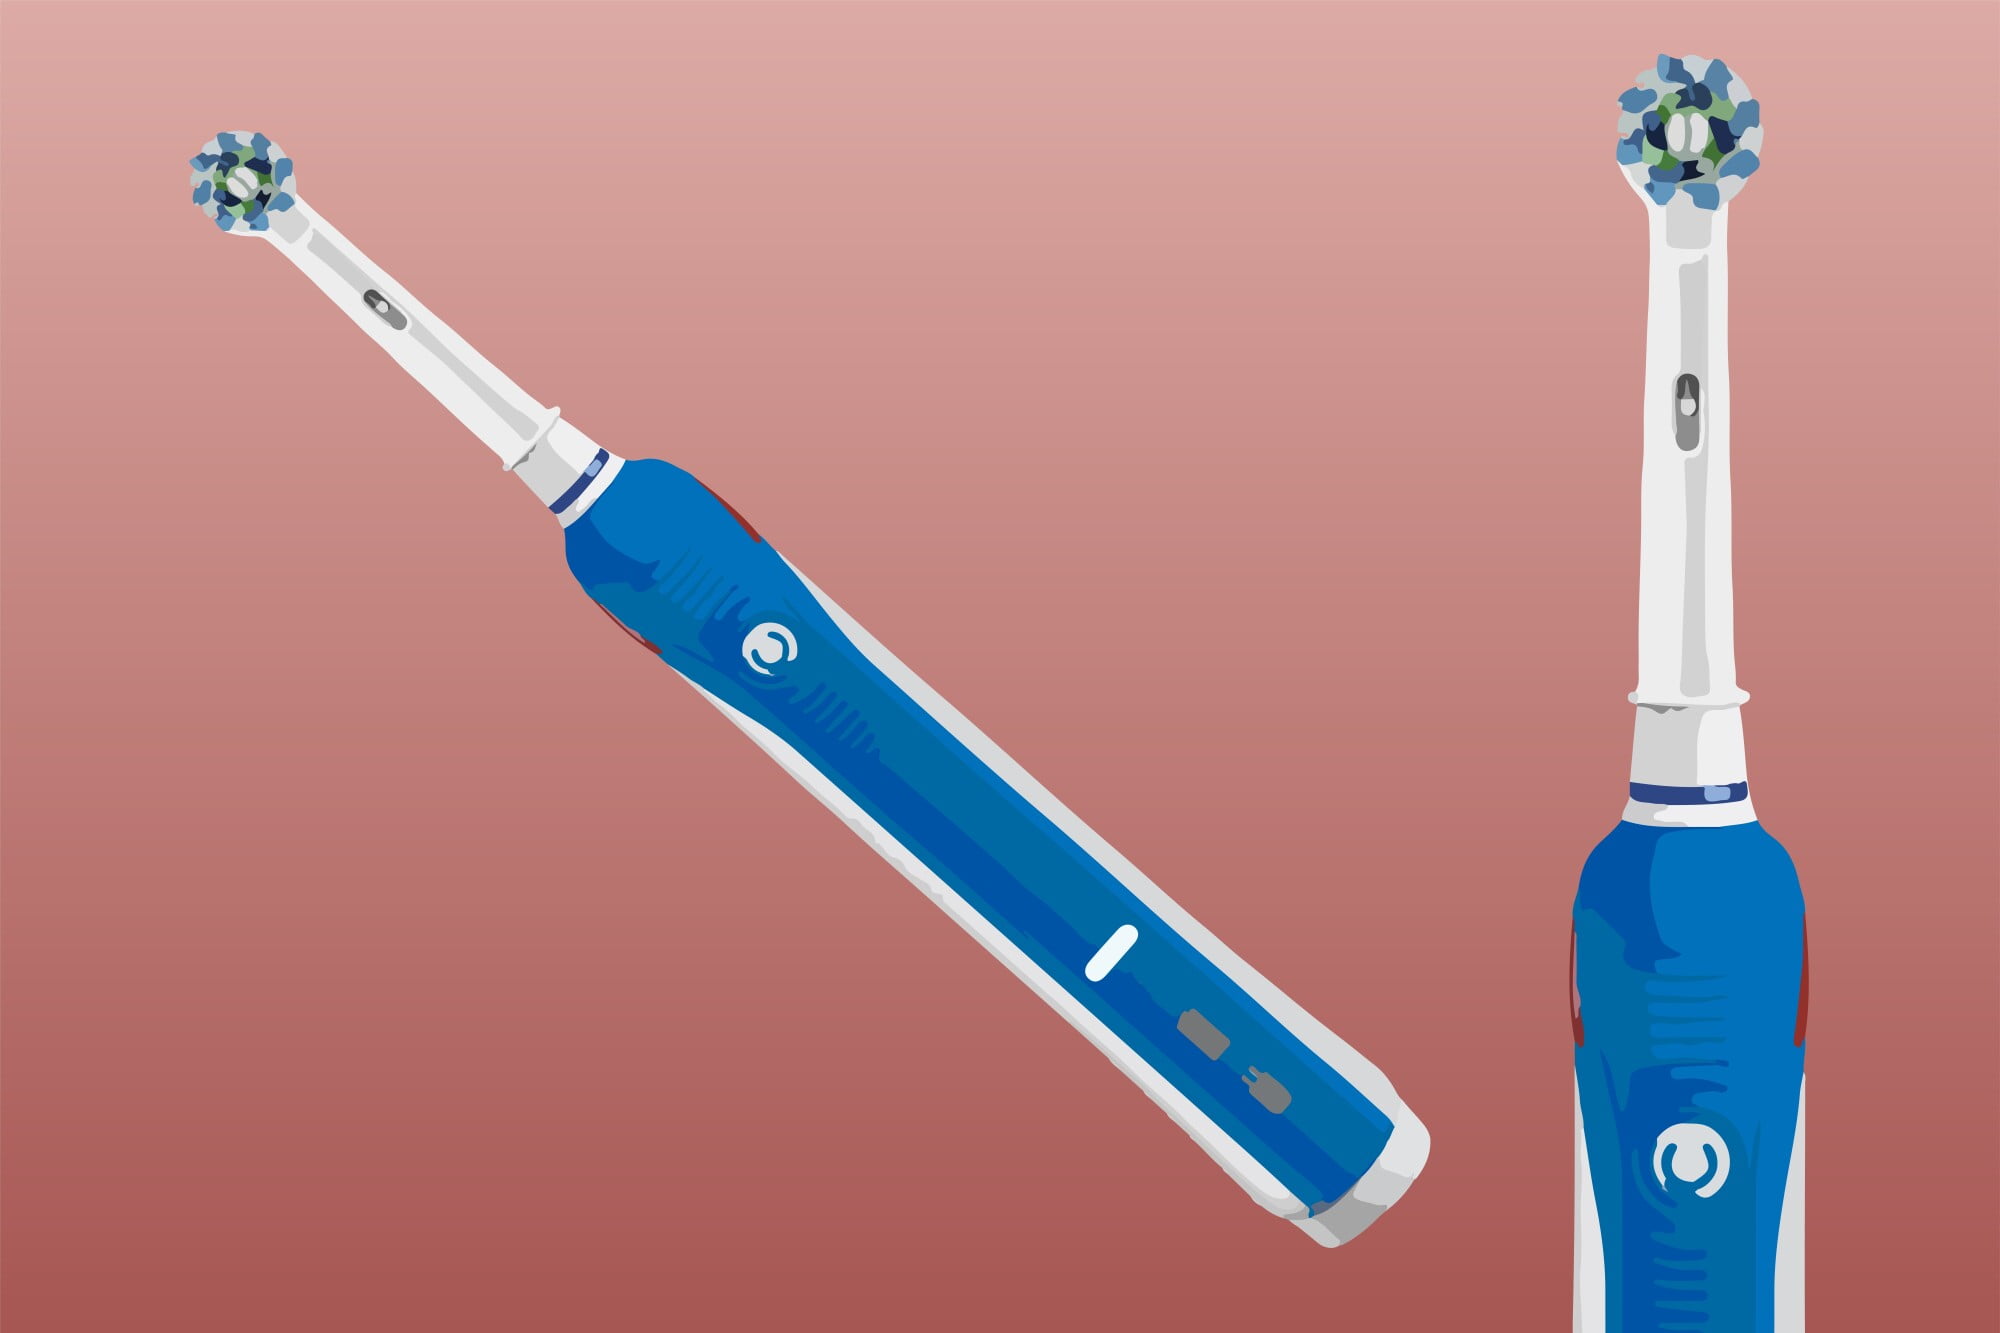 Your smile is important and using a good toothbrush is too. Check out the best electric toothbrush 2022 has to offer and how it can give you a healthy smile.